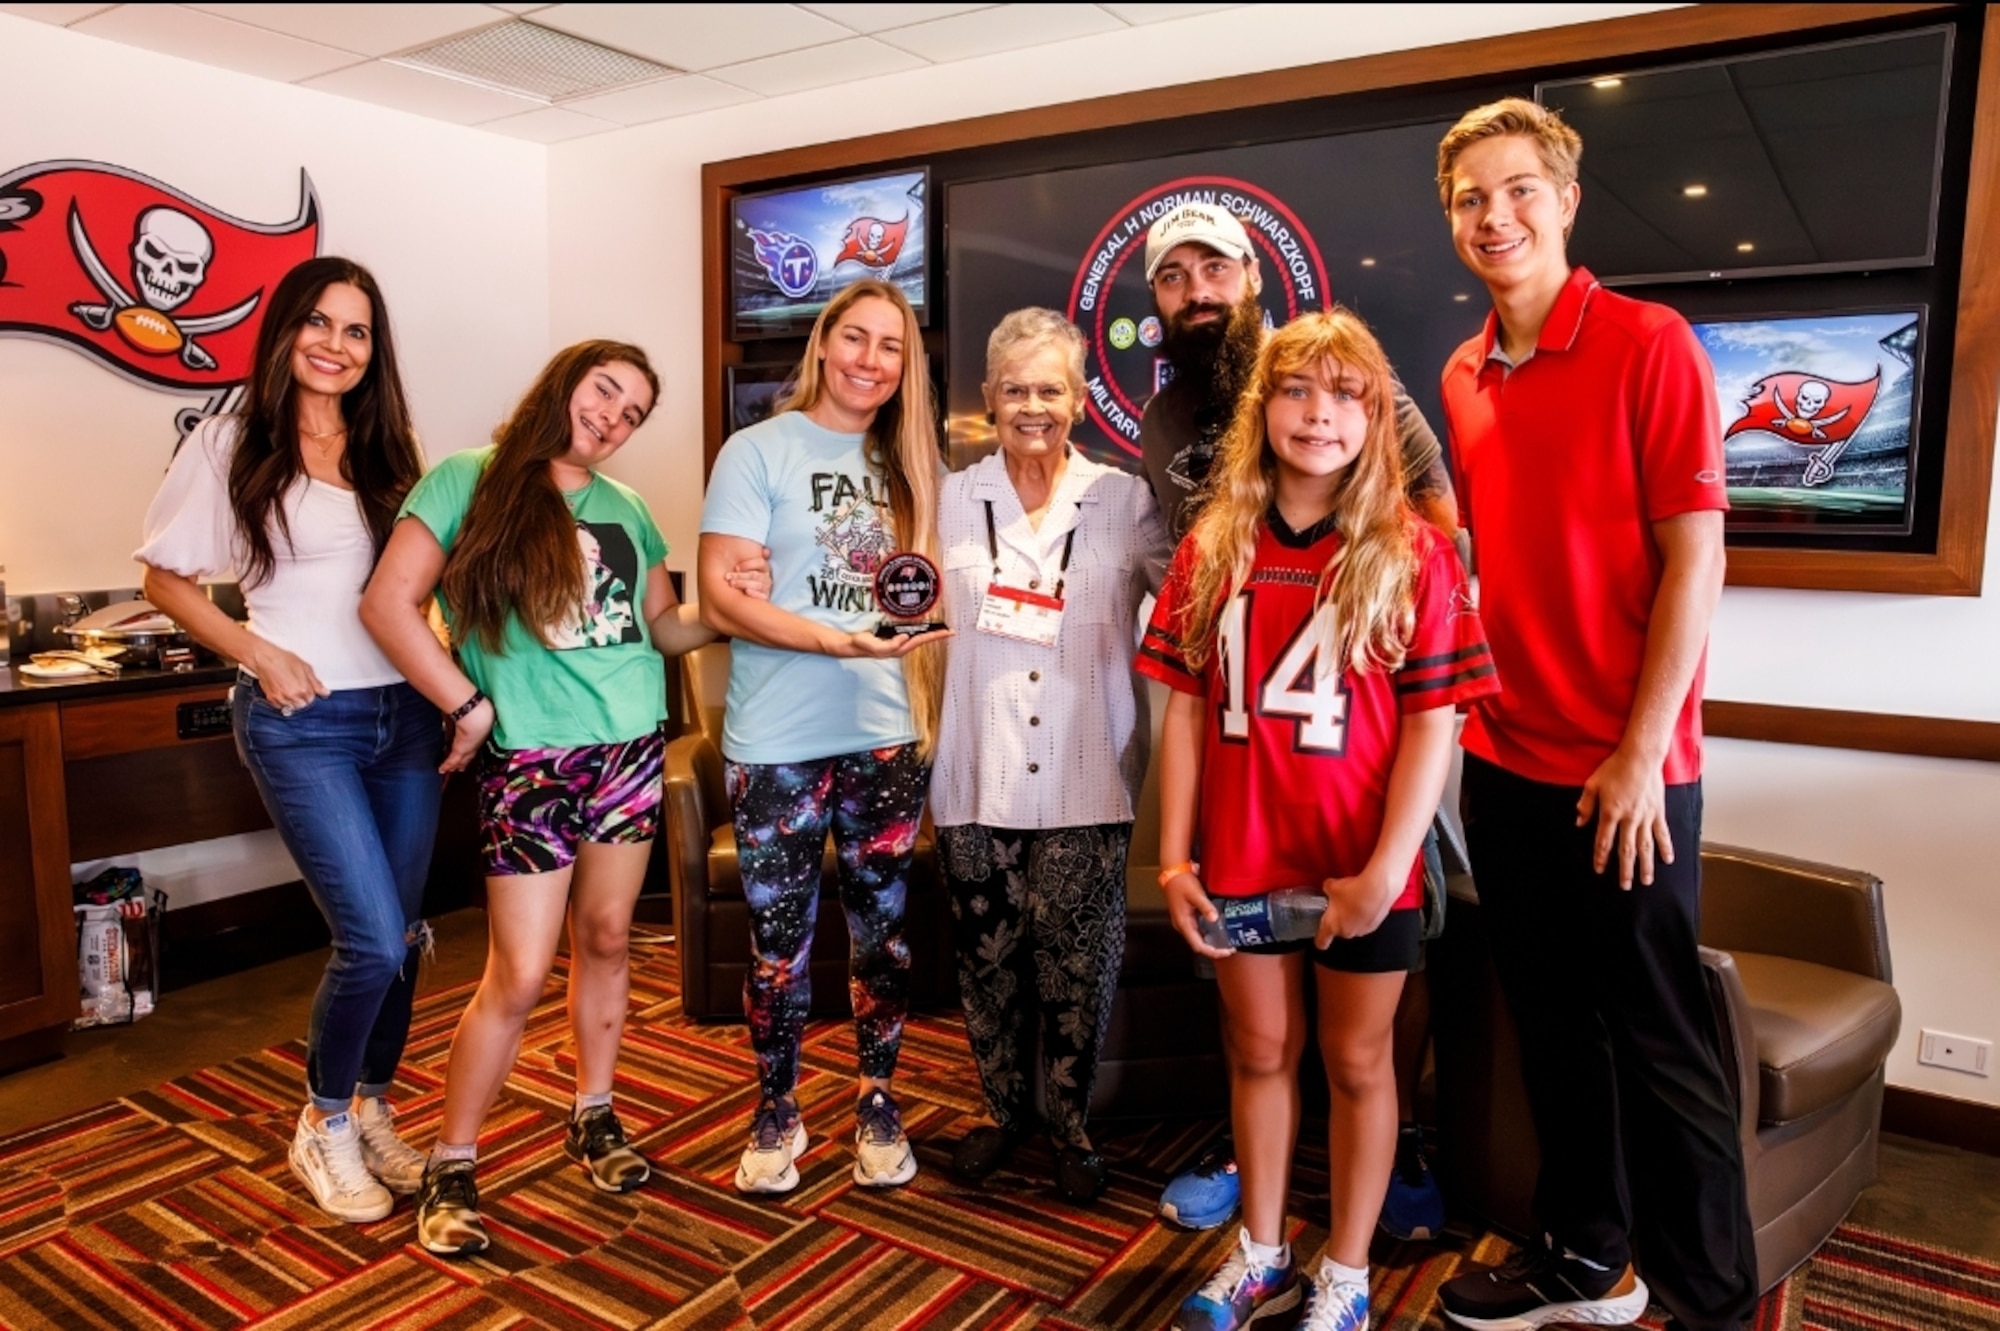 U.S. Space Force Capt. Tiffany Crick and her family pose with the family of late retired U.S. Army Gen. Norman Schwarzkop at the Salute to Service Suite in Raymond James Stadium in Tampa, Florida.